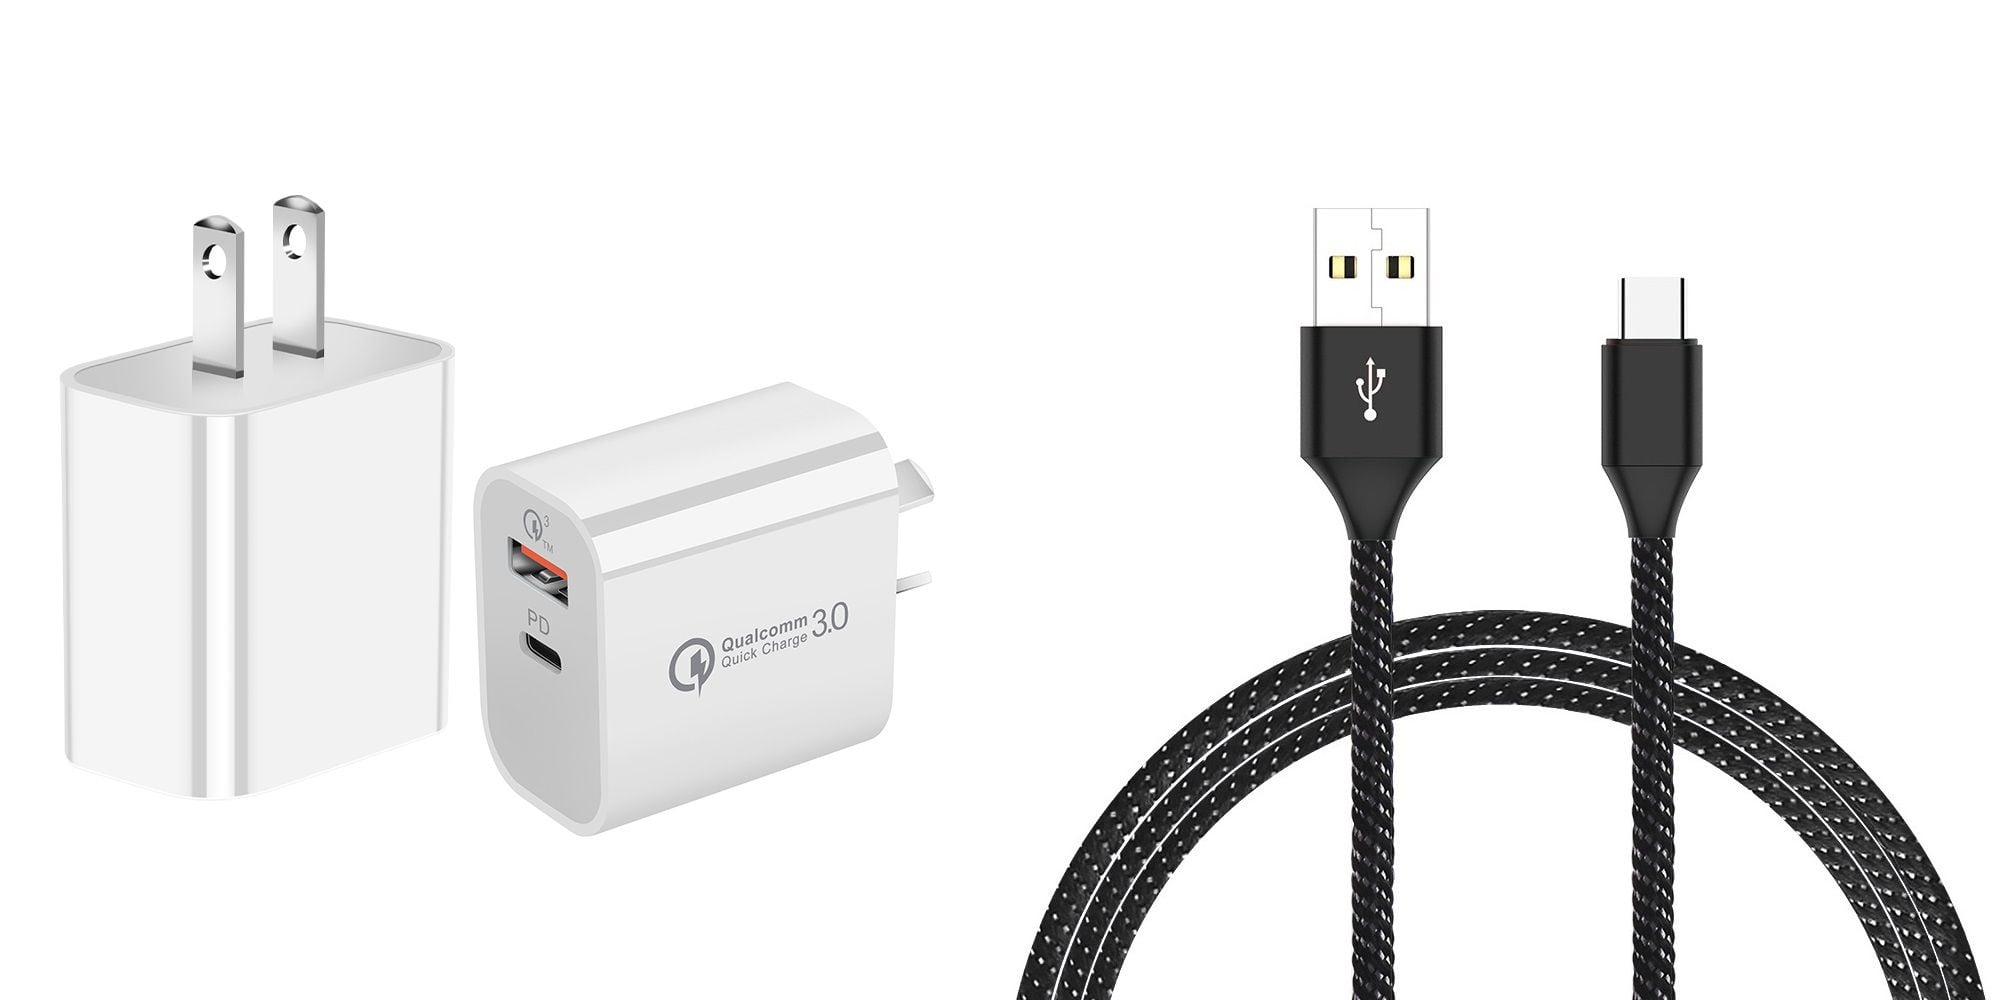 Multi Quick USB Charging Cable,Mystic Hand 2 in1 Fast Charger Cord Connector High Speed Durable Charging Cord Compatible with iPhone/Tablets/Samsung Galaxy/iPad and More 